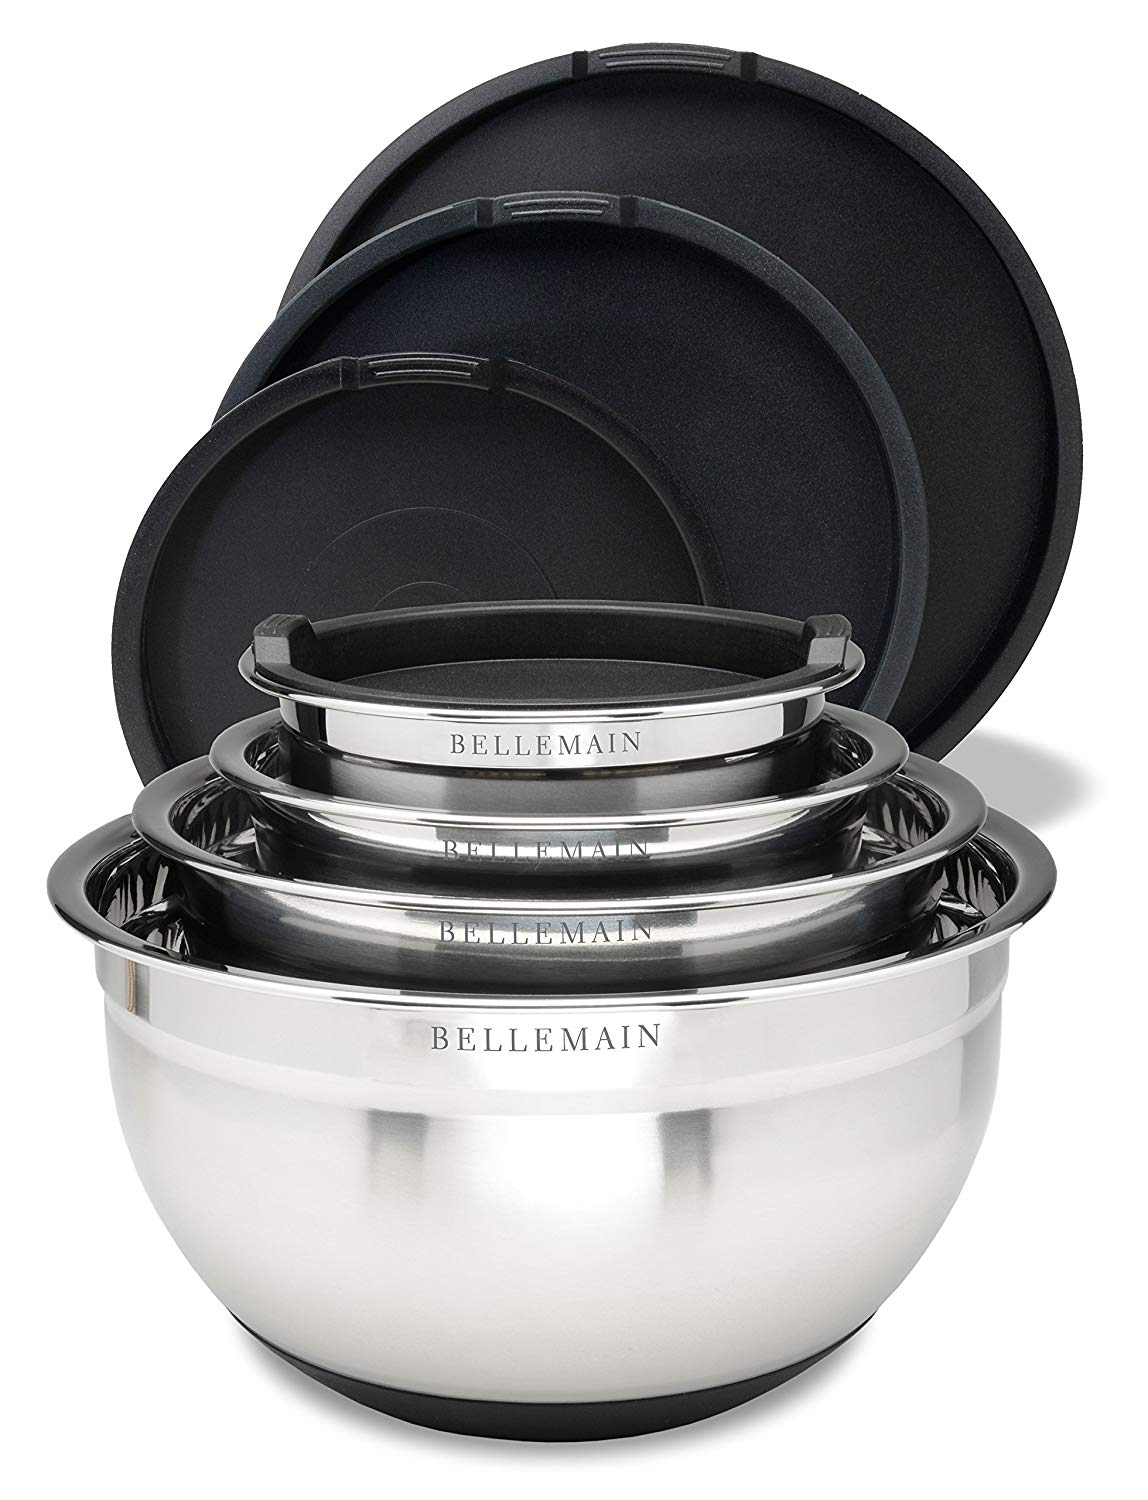 Top Rated Bellemain Stainless Steel Mixing Bowls $28.95 (REG $59.95)